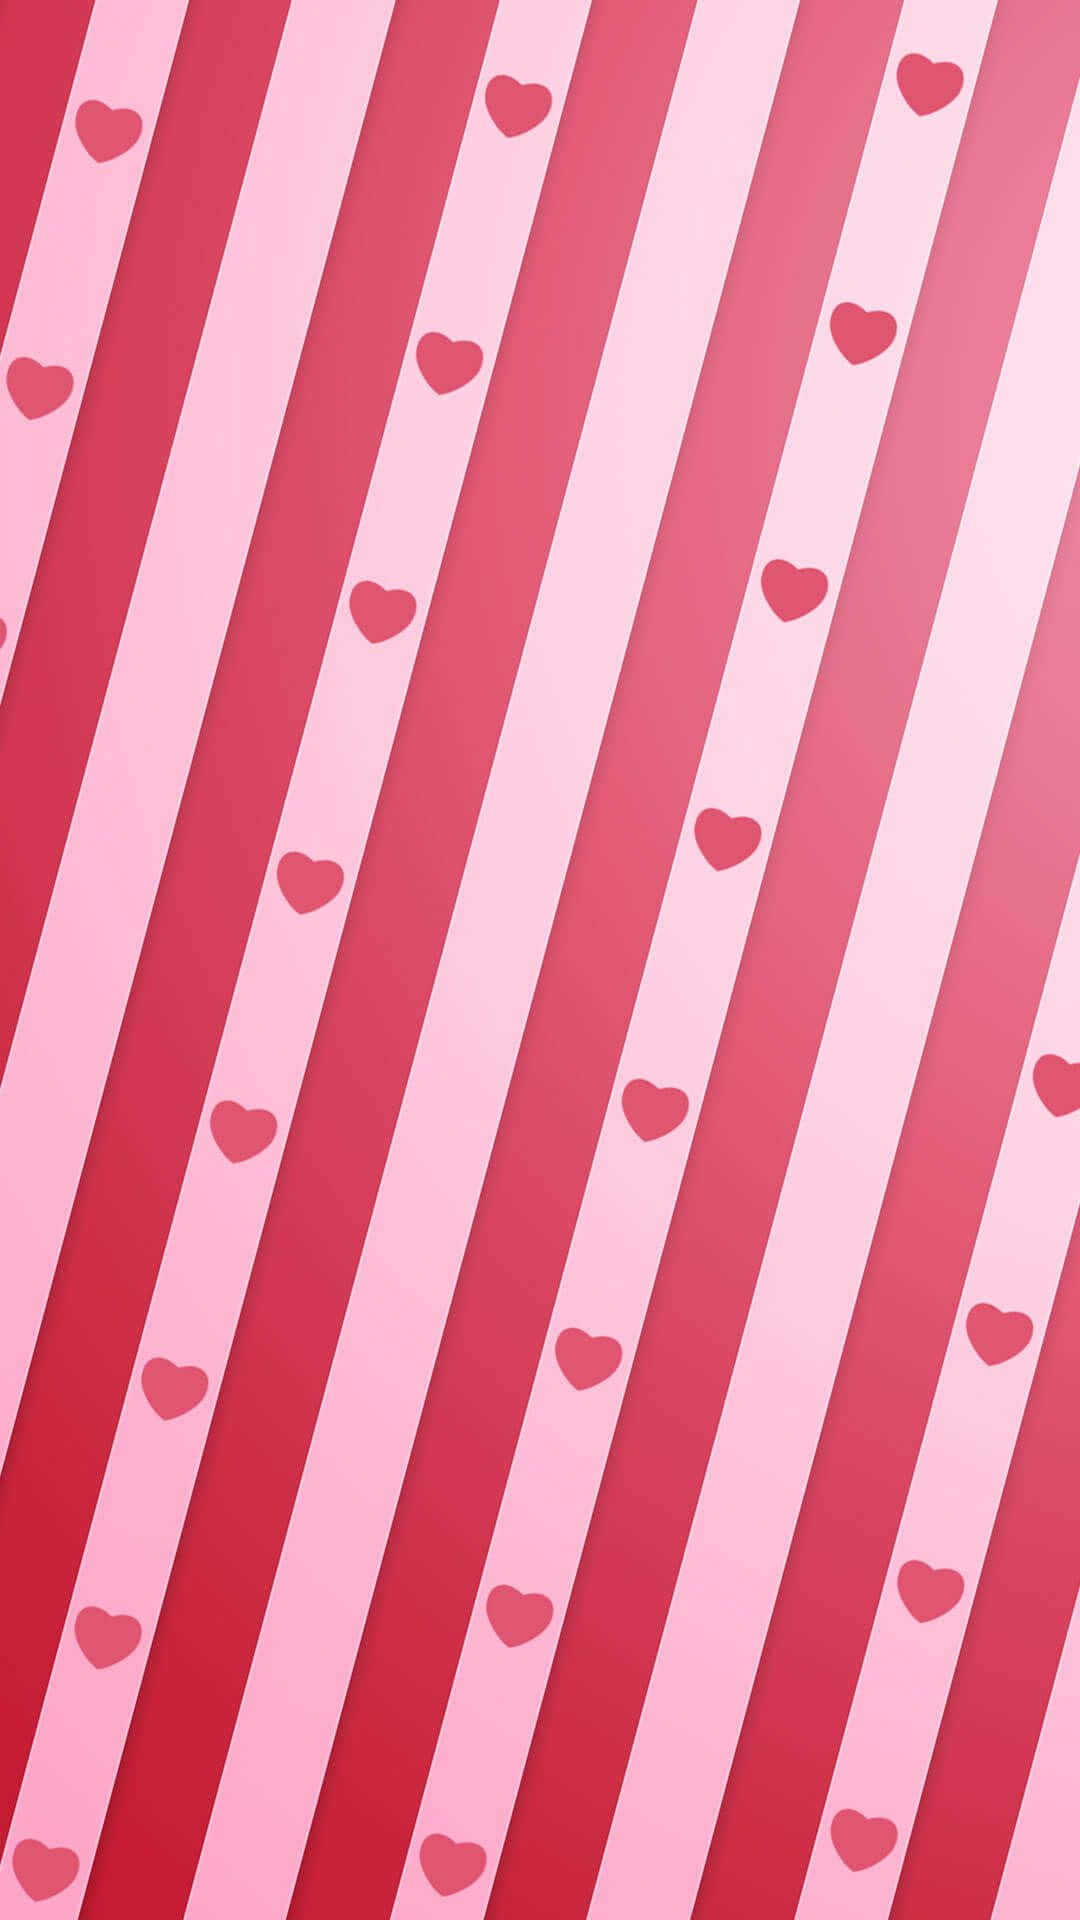 Stripes And Pink Hearts Iphone Wallpaper